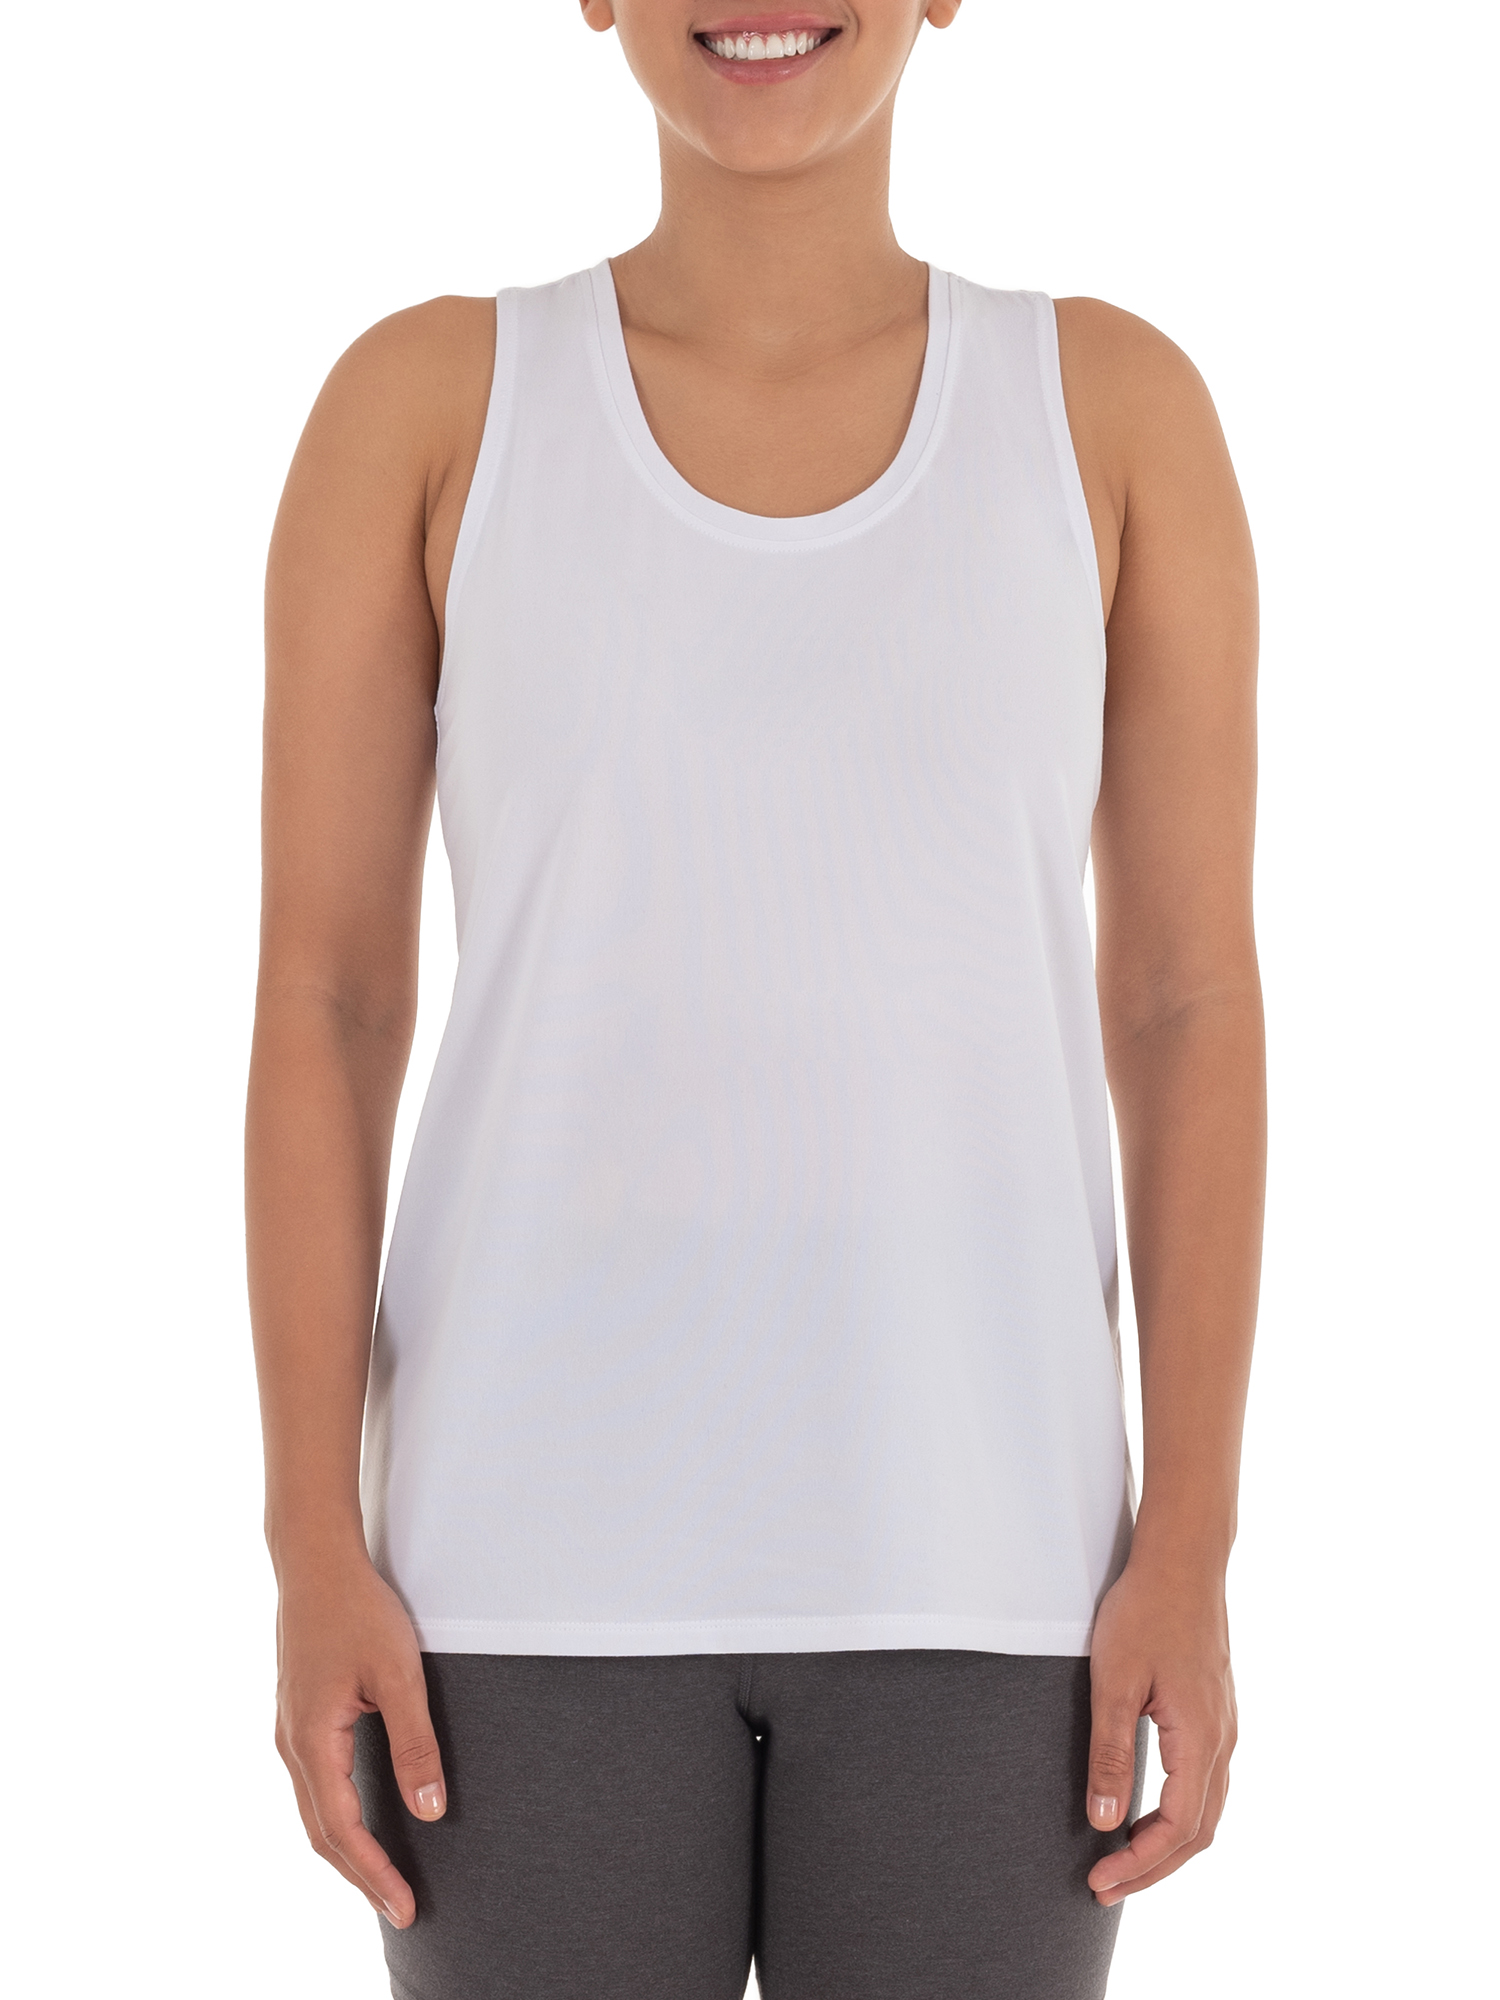 Athletic Works Mesh Tank Tops & Camisoles